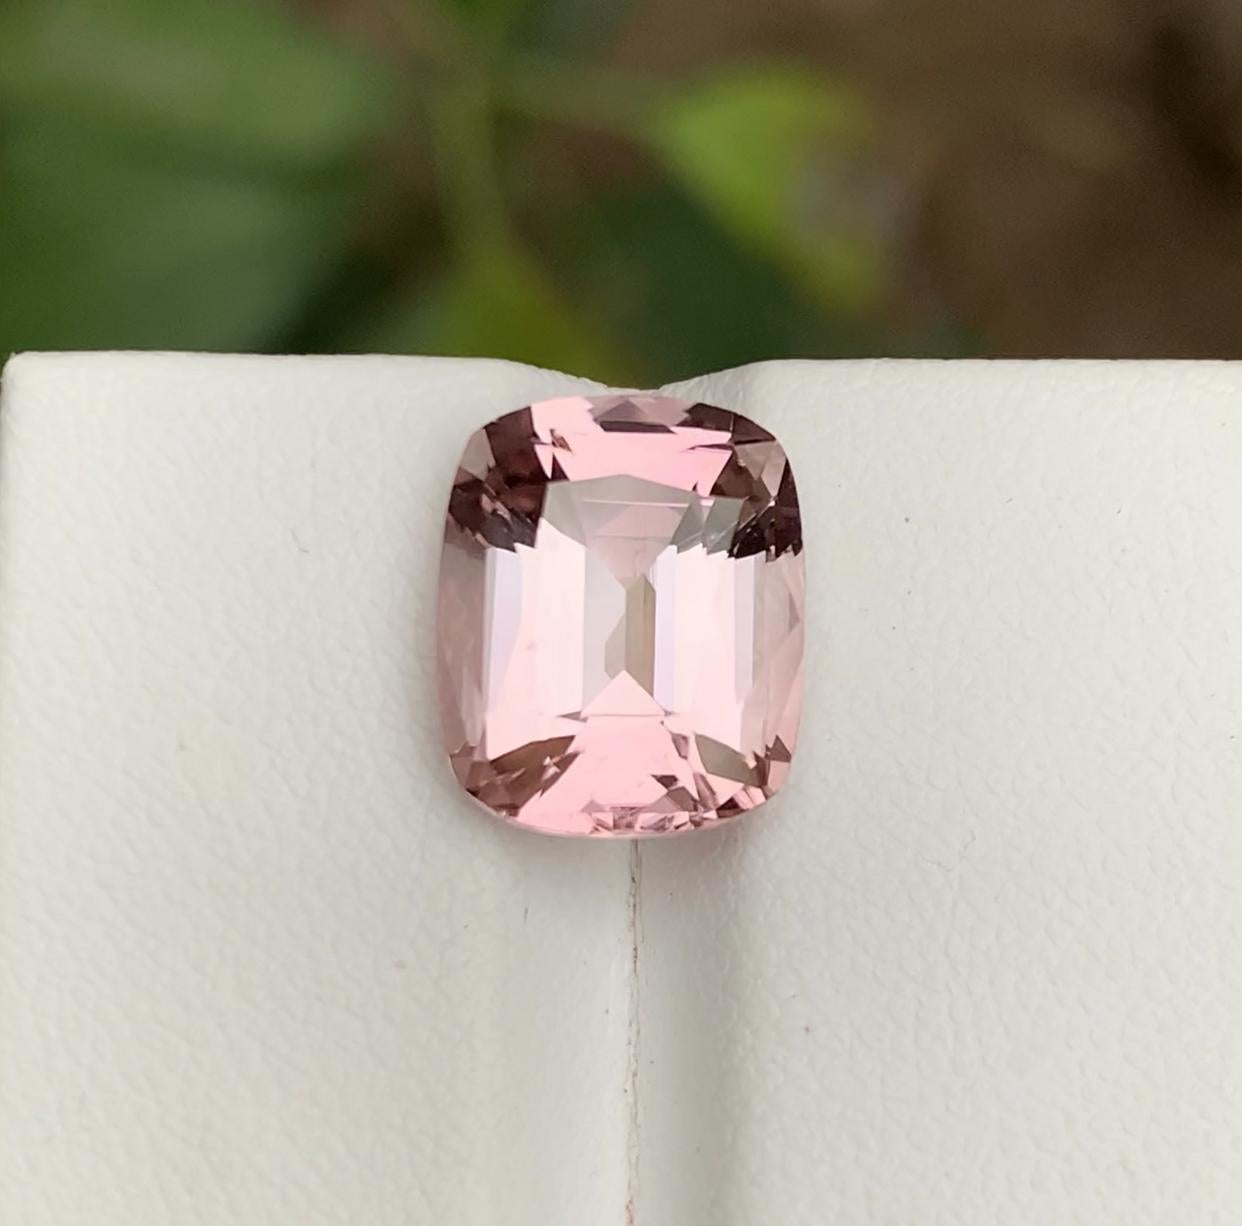 Contemporary Rare Peachy Pink Natural Tourmaline Gemstone, 5.70 Ct Cushion Cut-Ring/Pendant For Sale